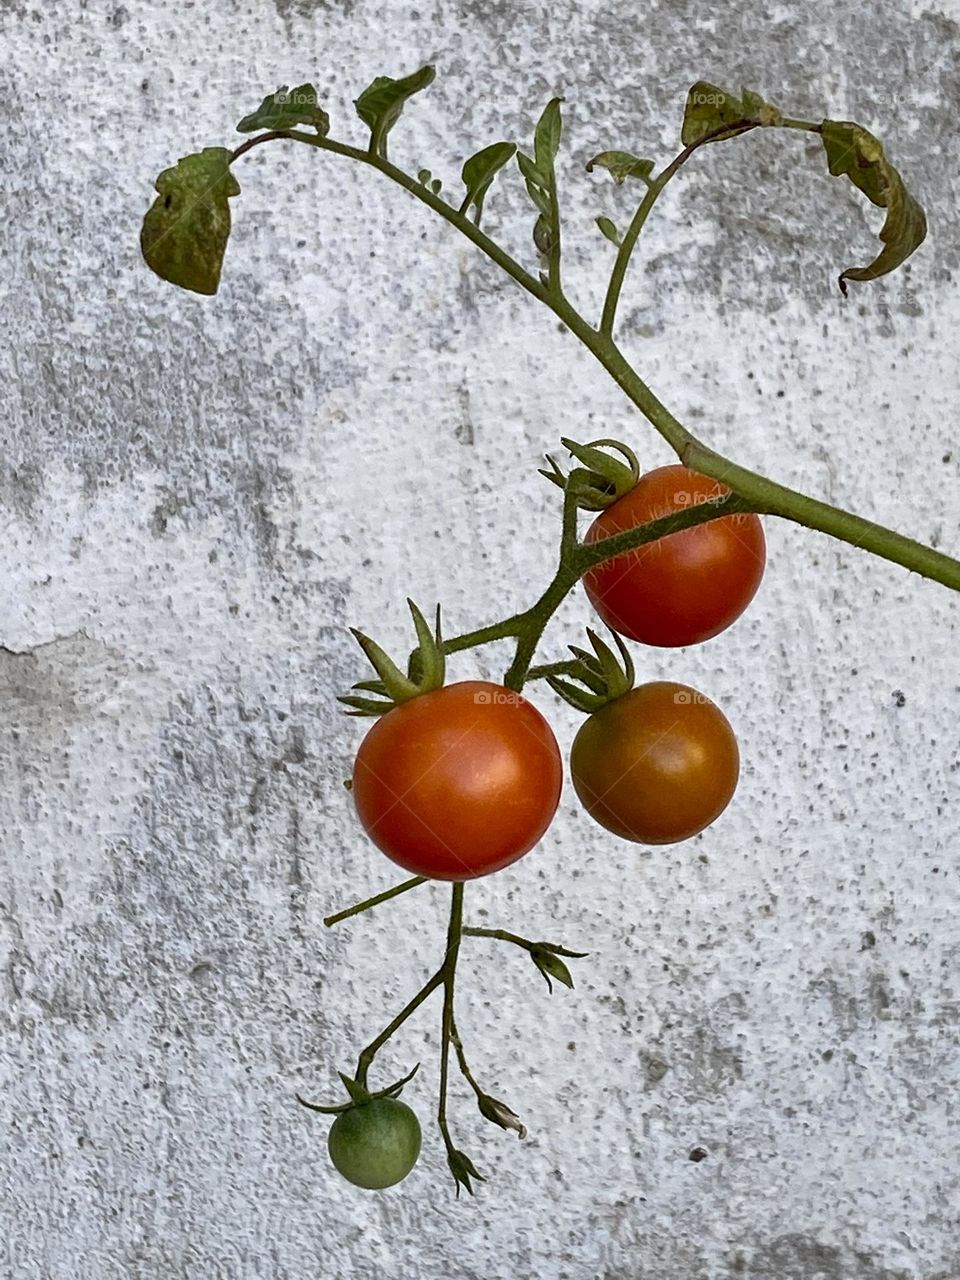 Cherry tomatoes against wall